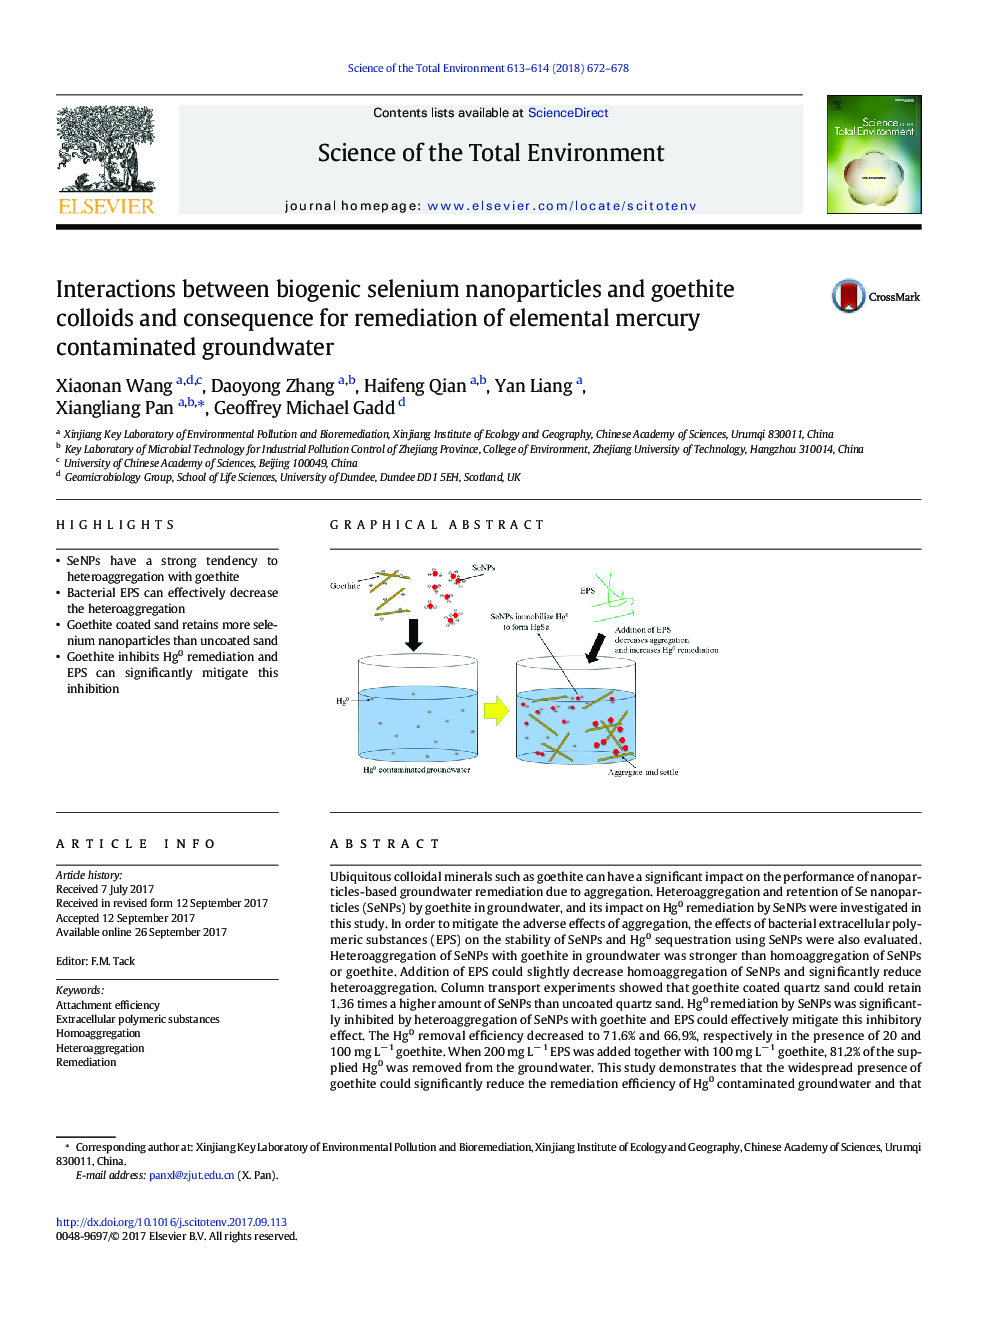 Interactions between biogenic selenium nanoparticles and goethite colloids and consequence for remediation of elemental mercury contaminated groundwater